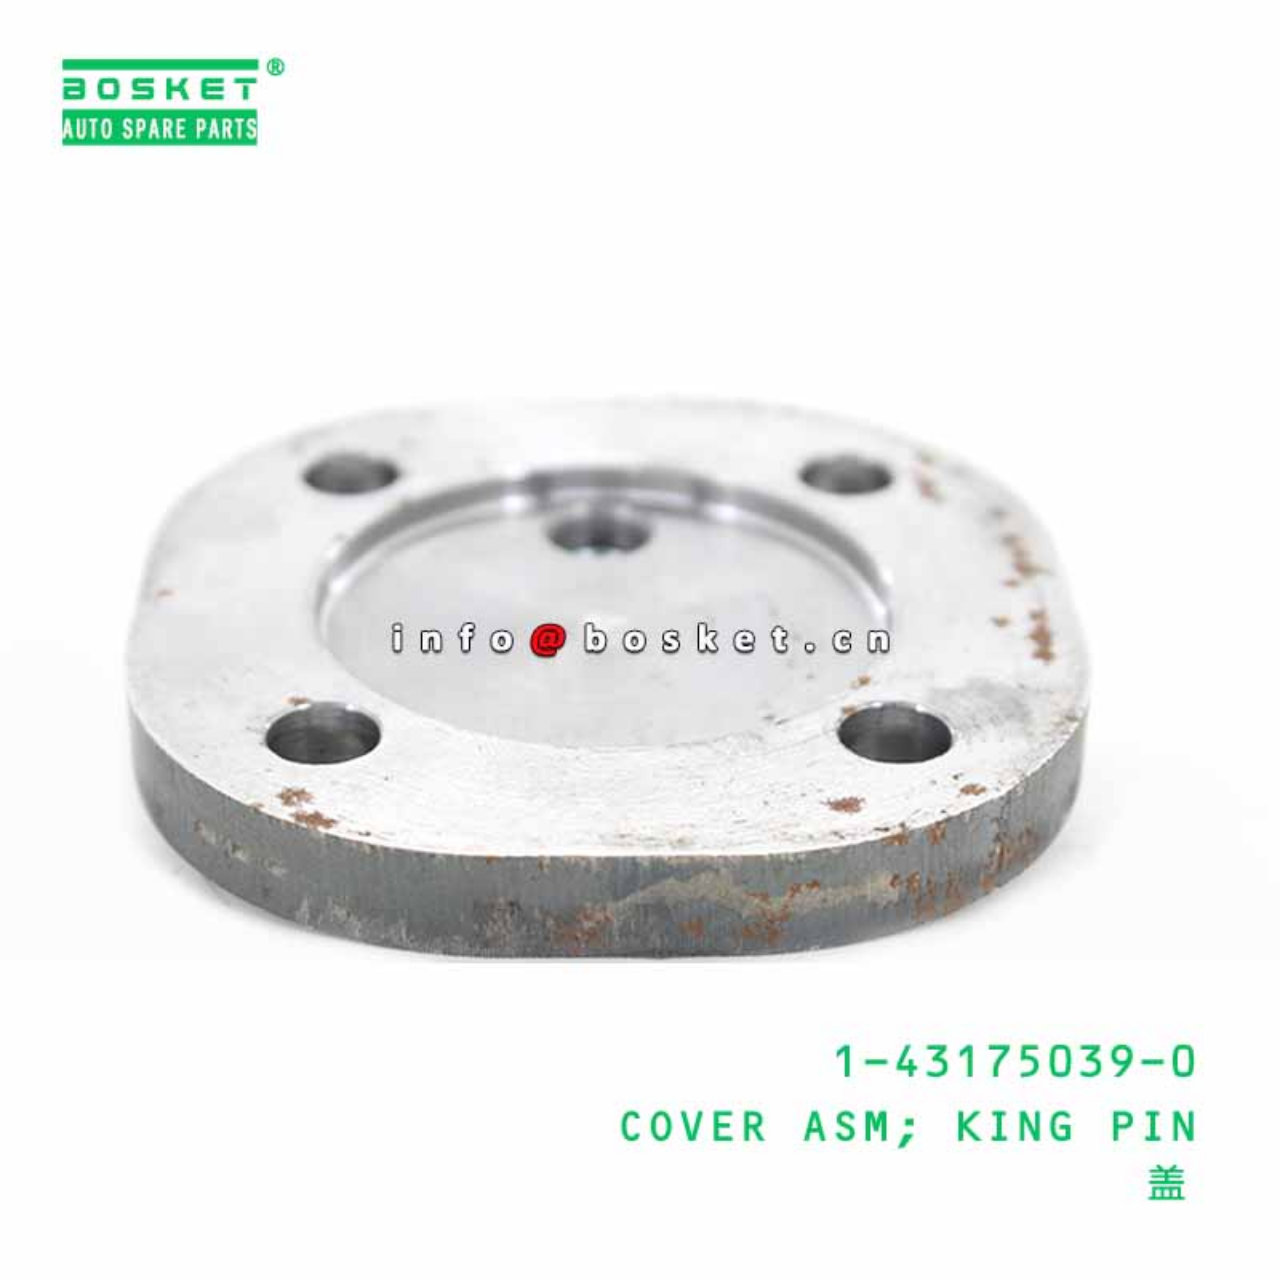 1-43175039-0 1431750390 KING PIN COVER ASSEMBLY Suitable For ISUZU